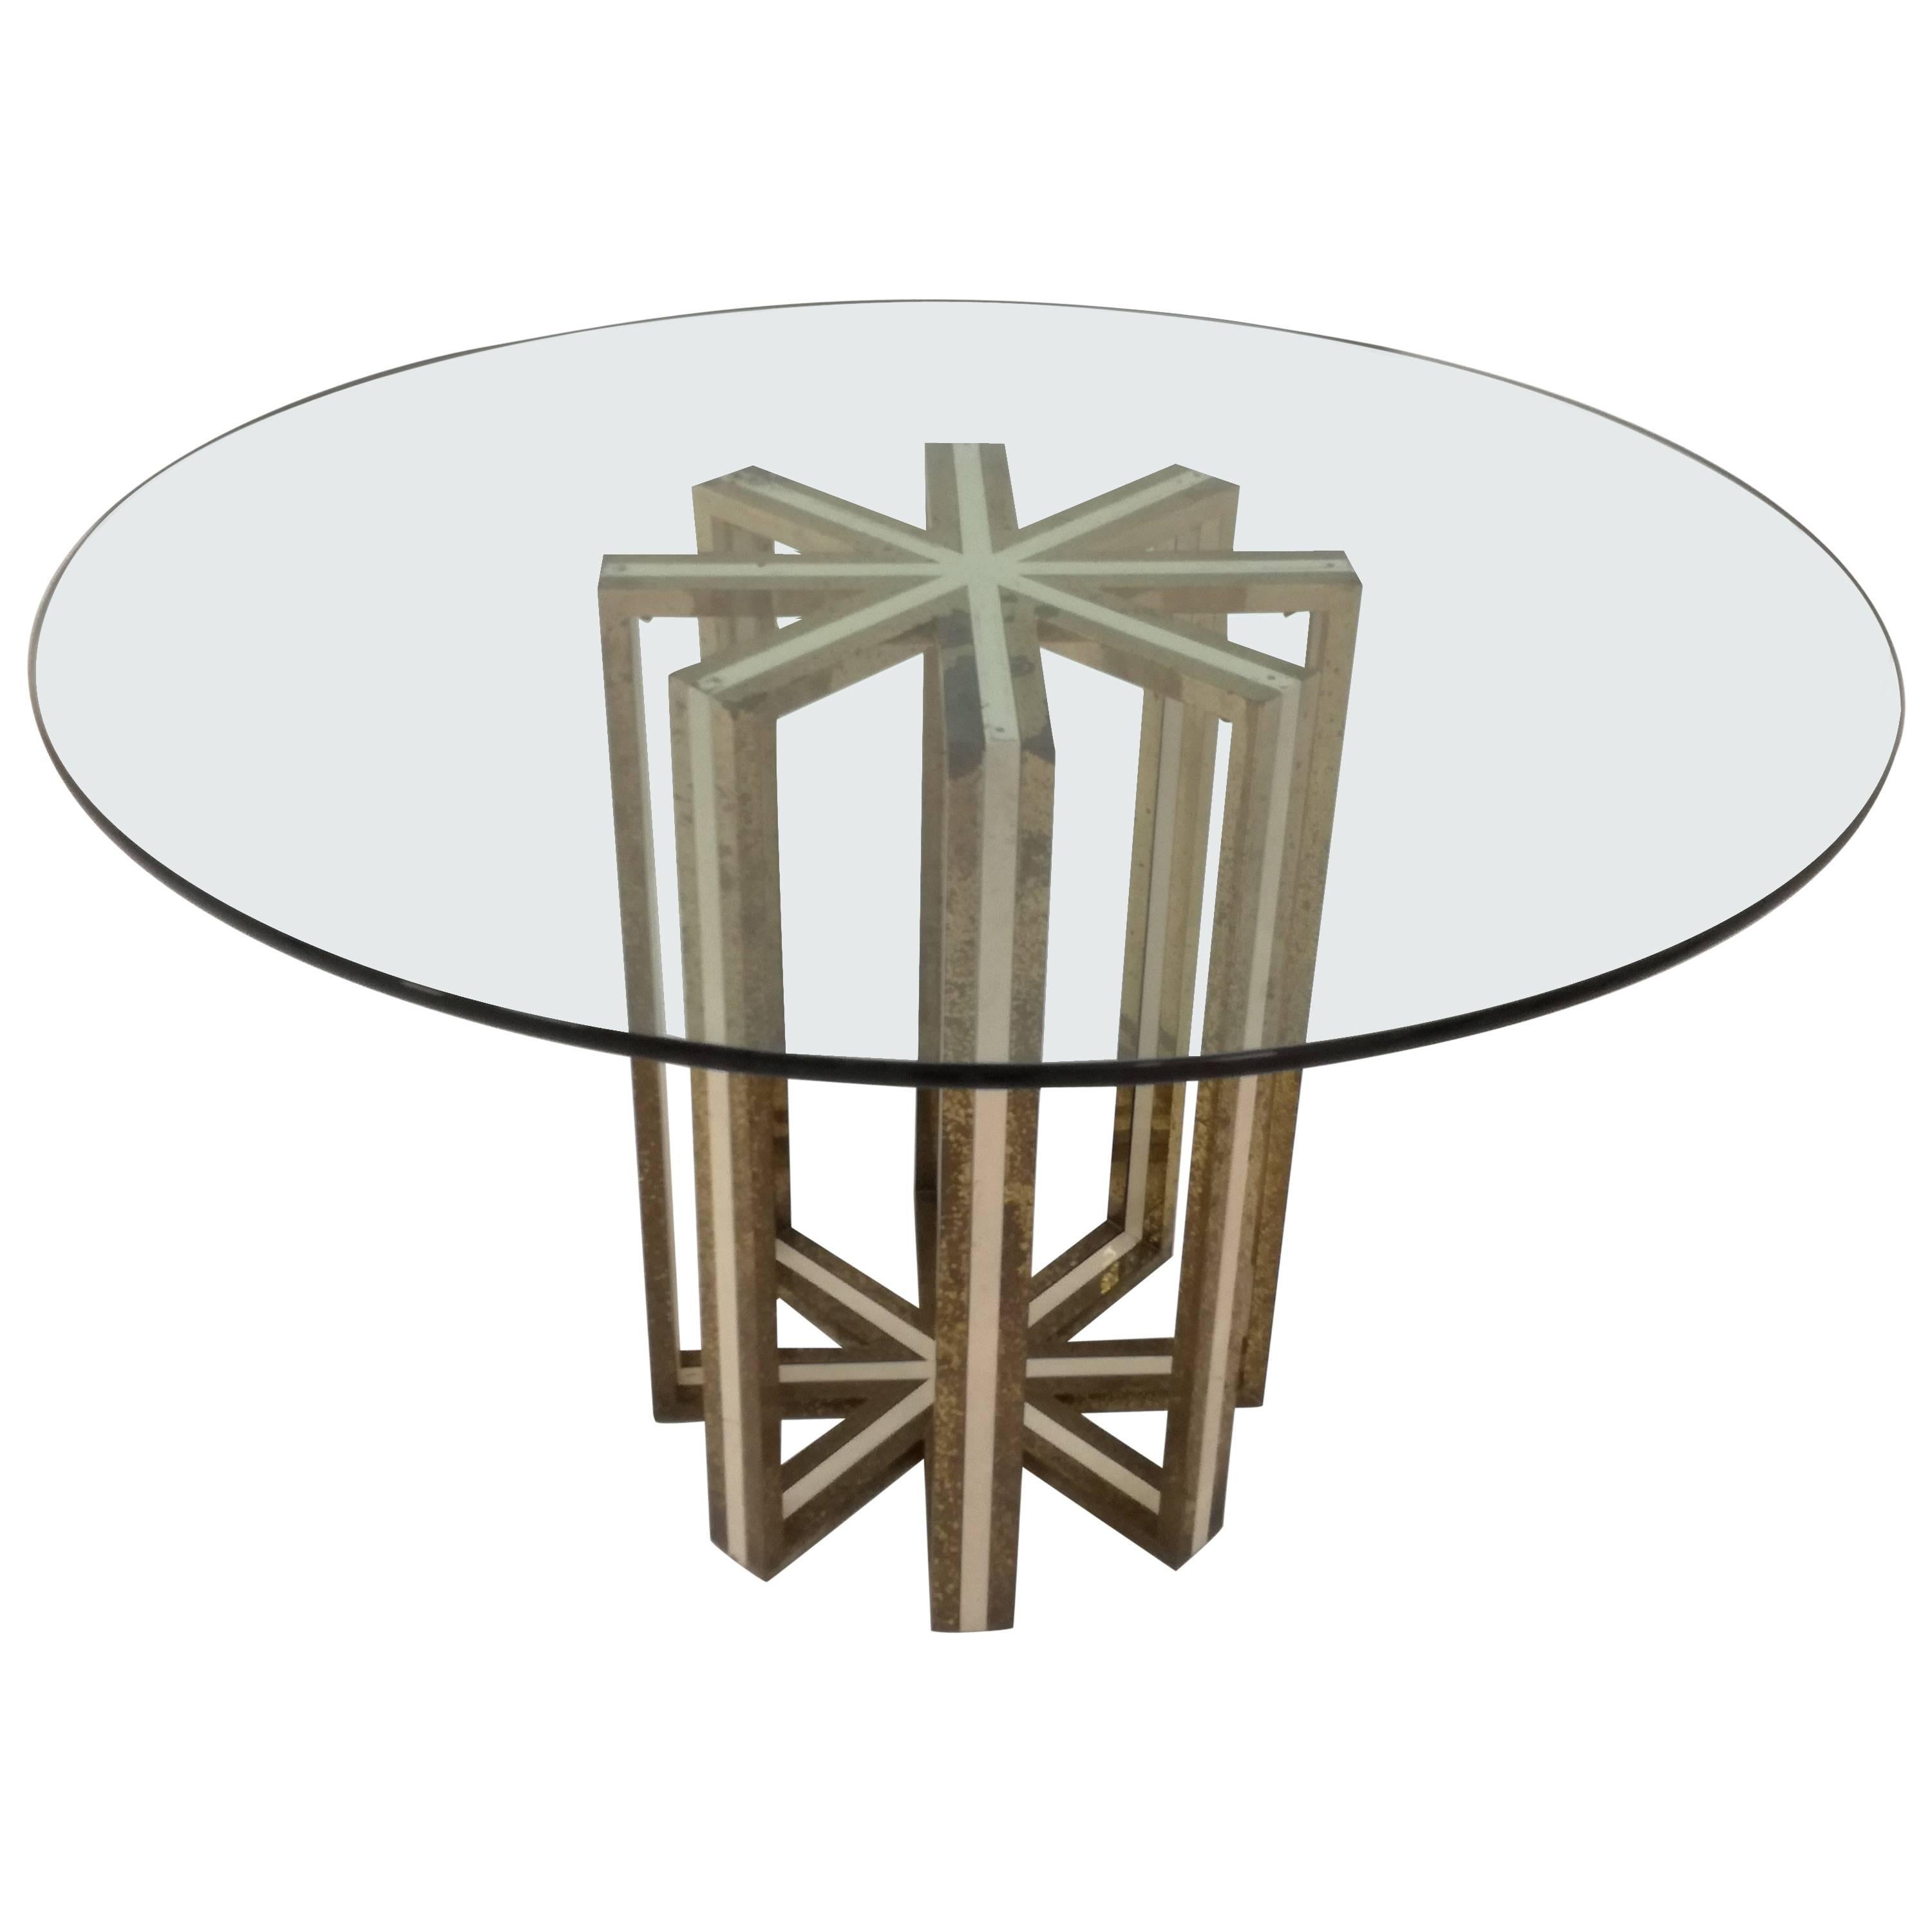 Nucci Valsecchi Round Table with Glass Top For Sale